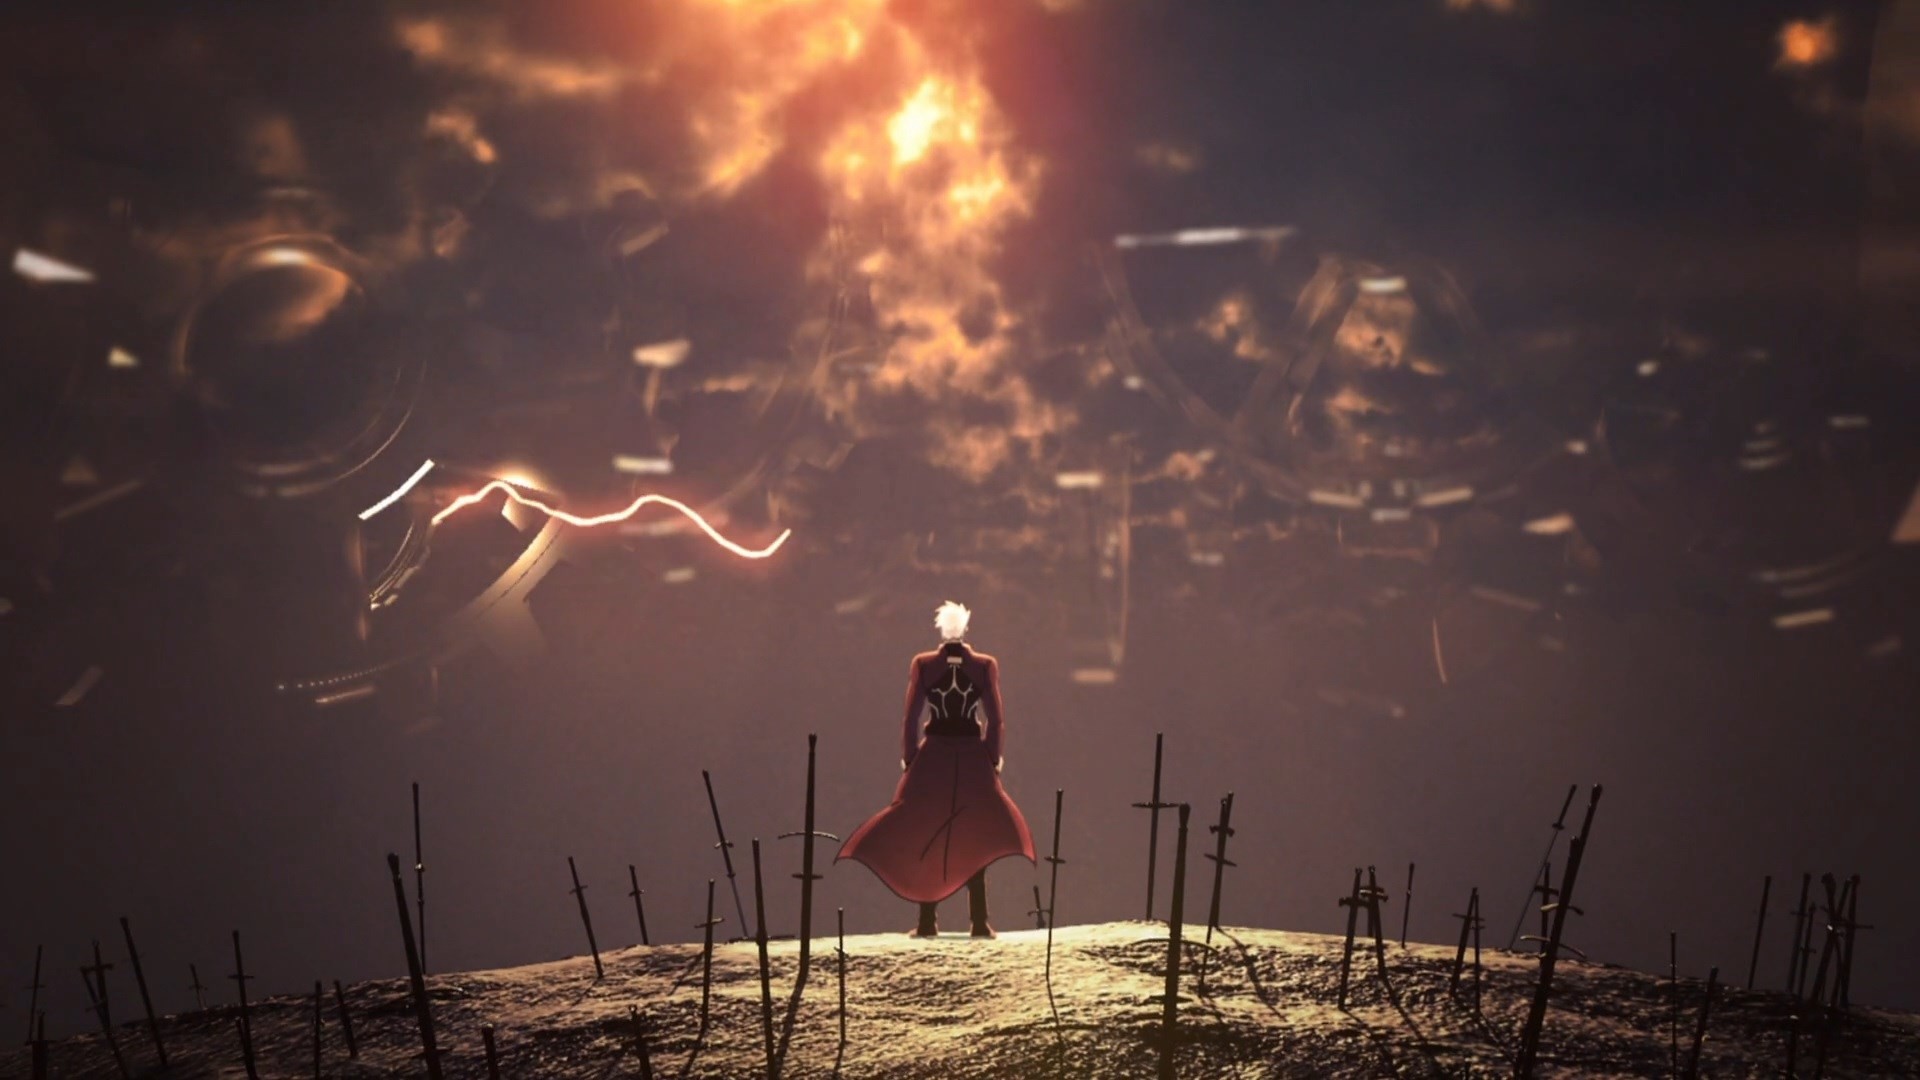 Iphone Unlimited Blade Works Wallpaper